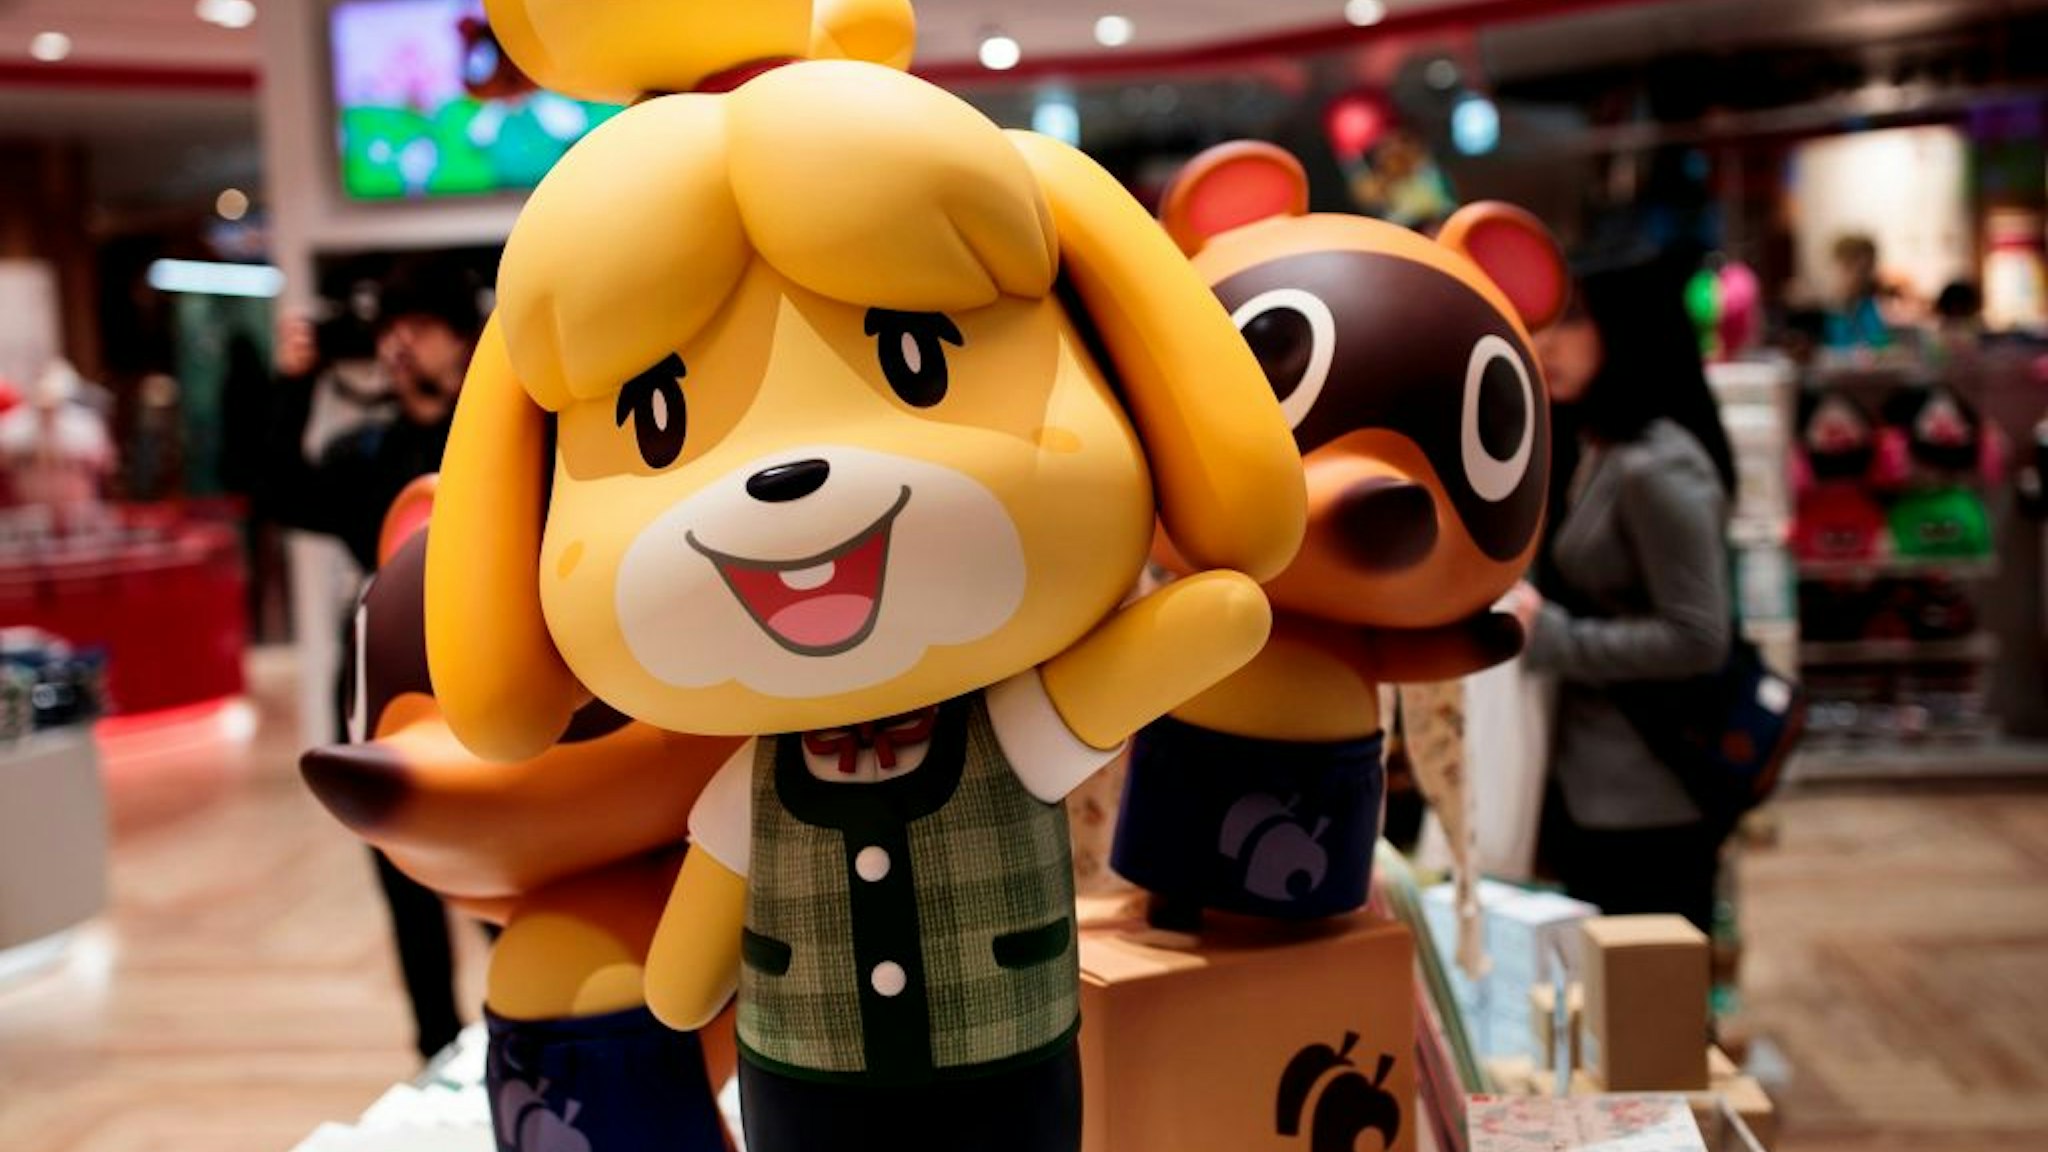 This picture taken on November 19, 2019 shows dolls of Nintendo game characters Isabelle (C), known as Shizue in Japan, and Tom Nook (R), known in Japan as Tanukichi, from the Animal Crossing series of video games as they are displayed at a new Nintendo store during a press preview in Tokyo.